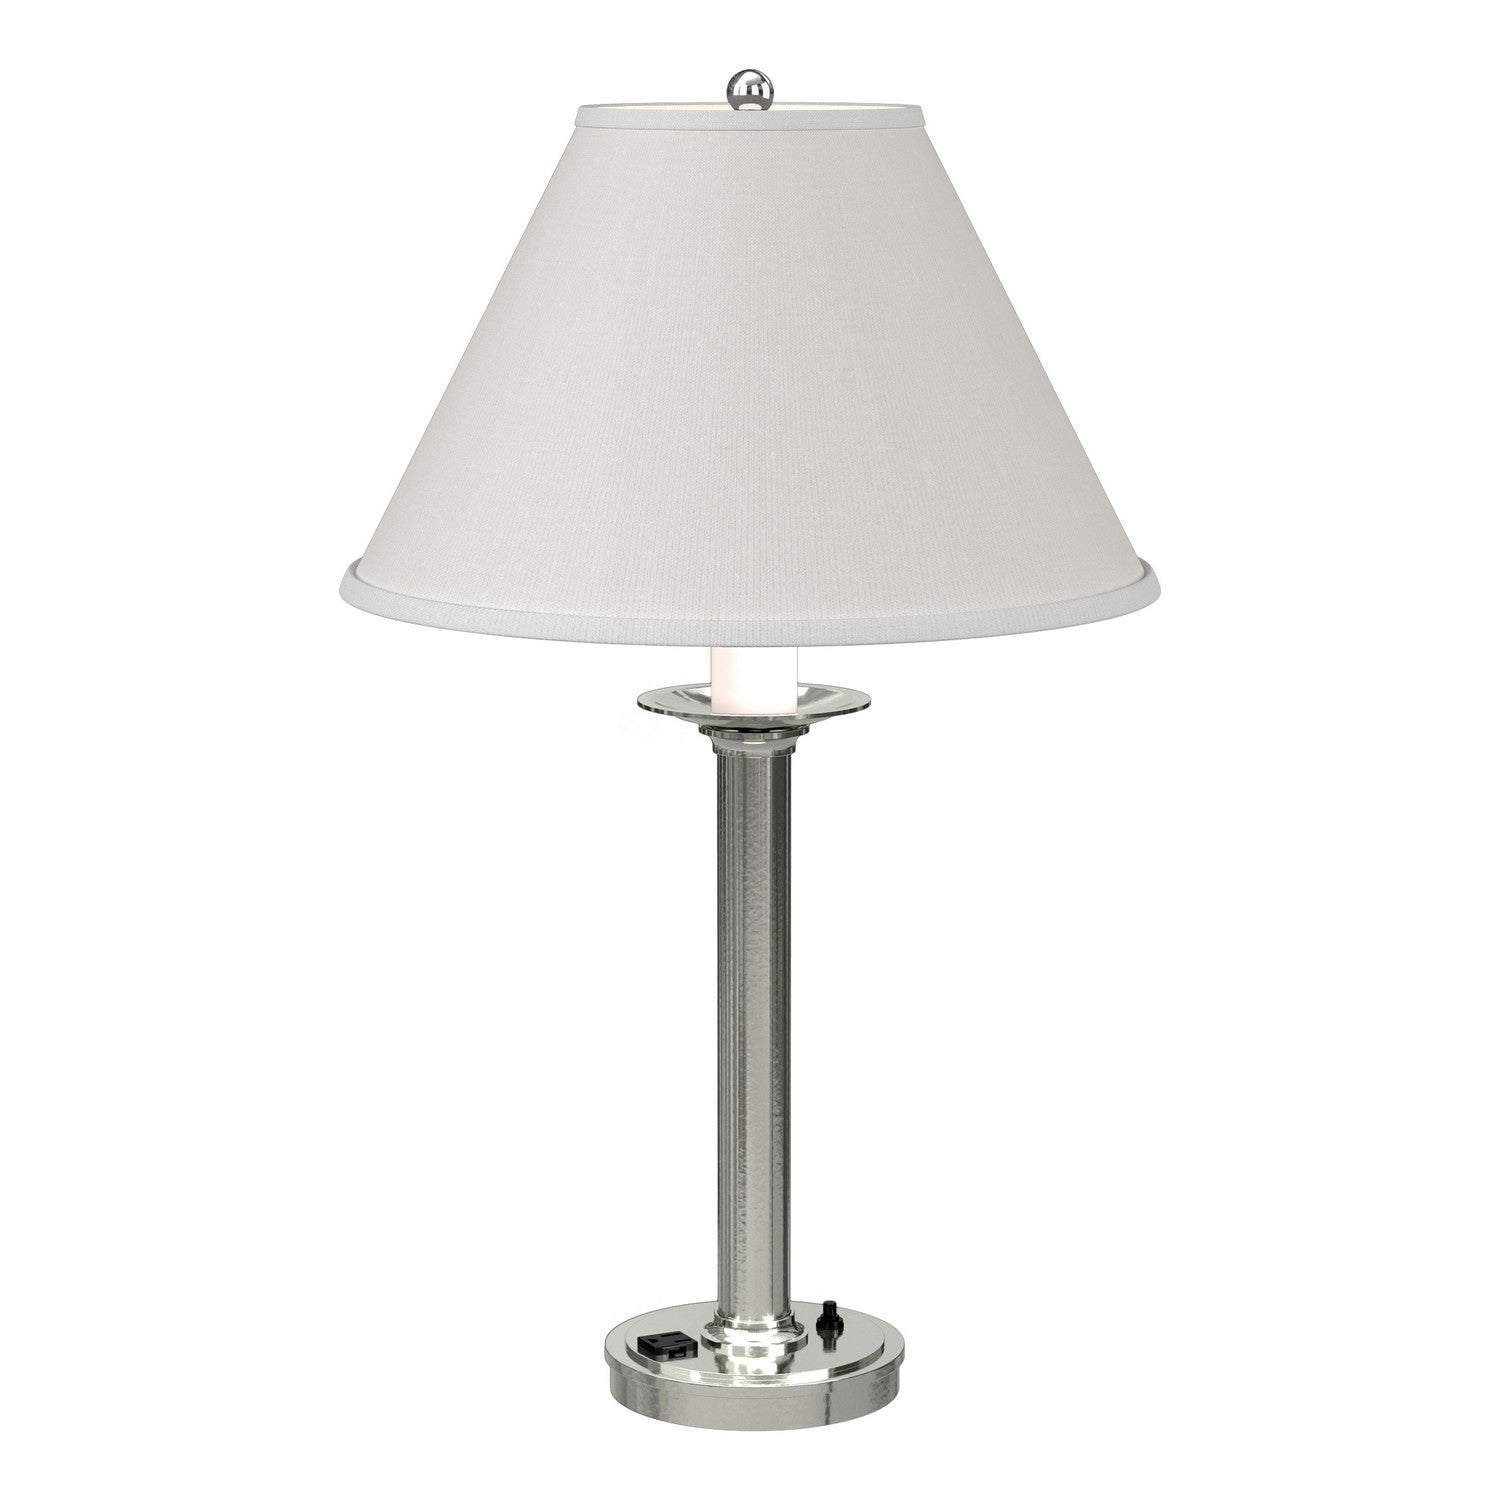 Hubbardton Forge - One Light Table Lamp - Simple Lines - Sterling- Union Lighting Luminaires Decor